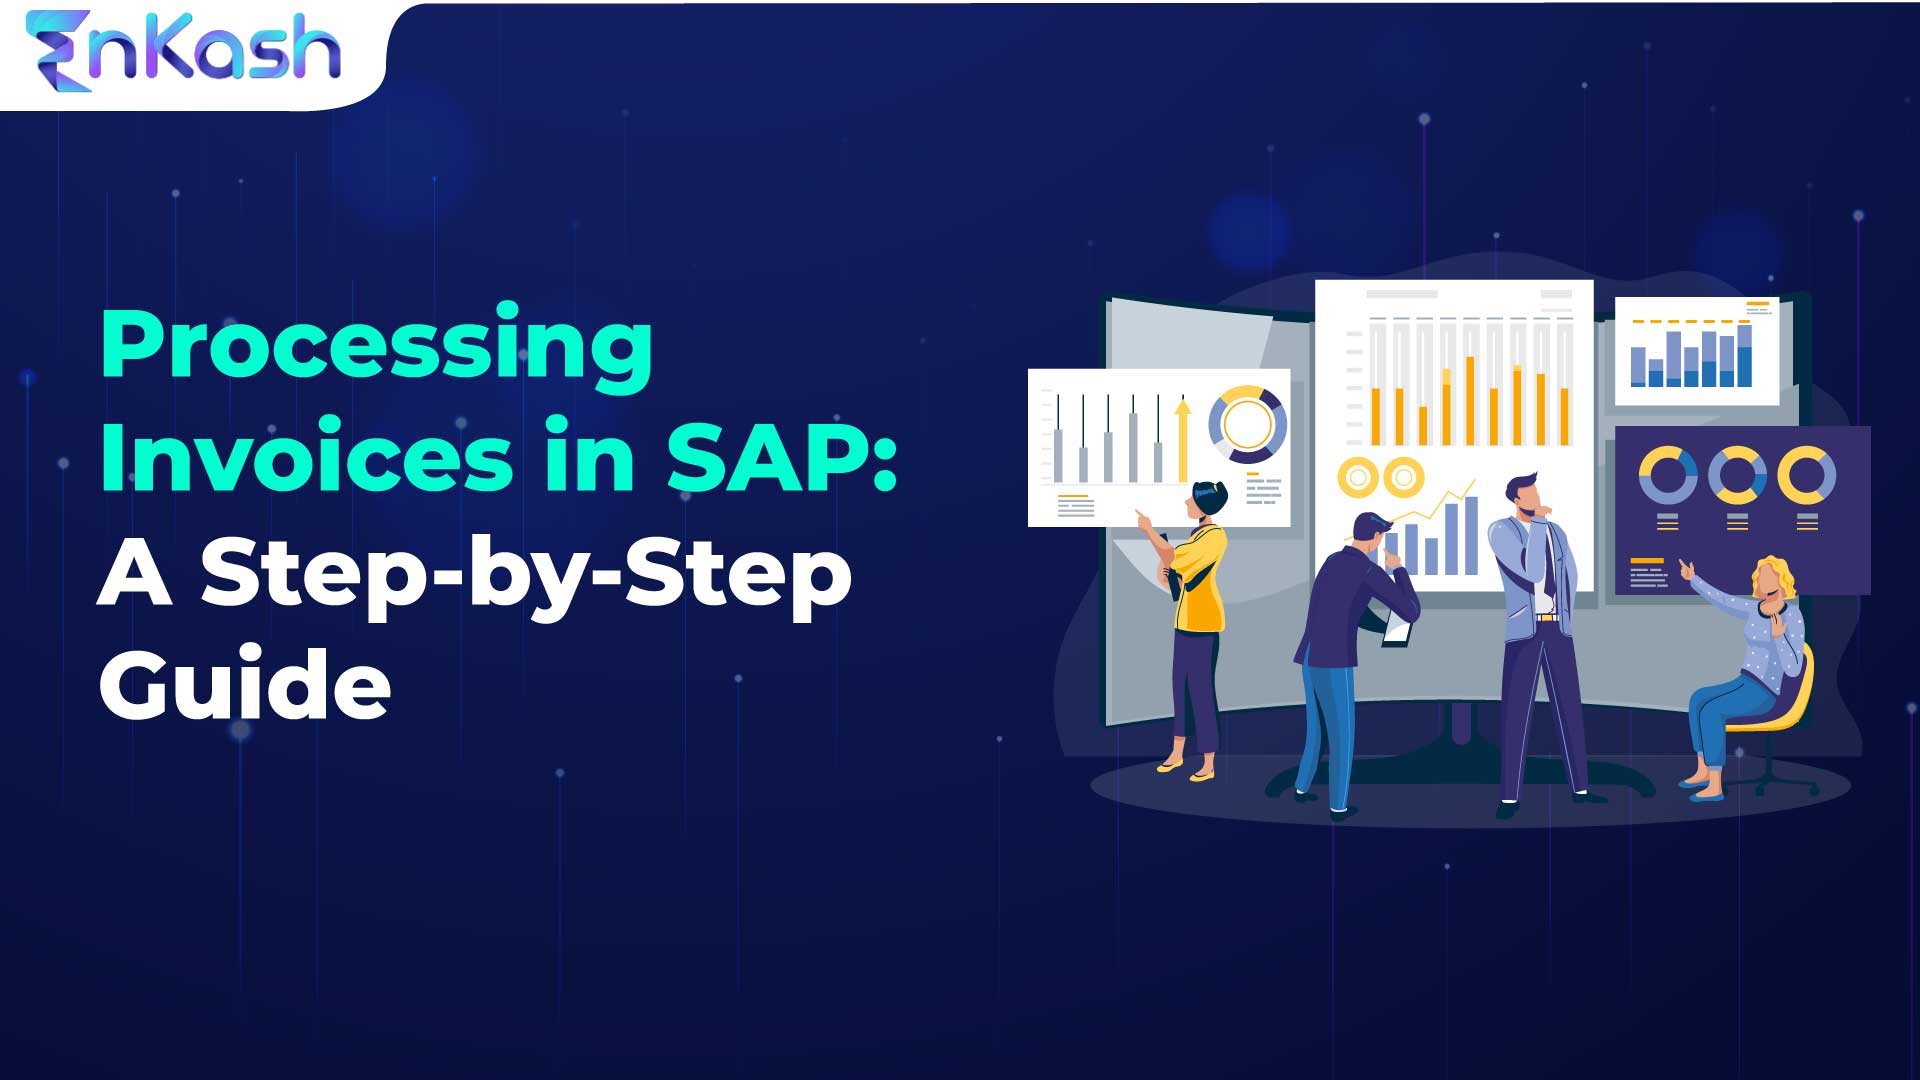 Processing Invoices in SAP: A Step-by-Step Guide